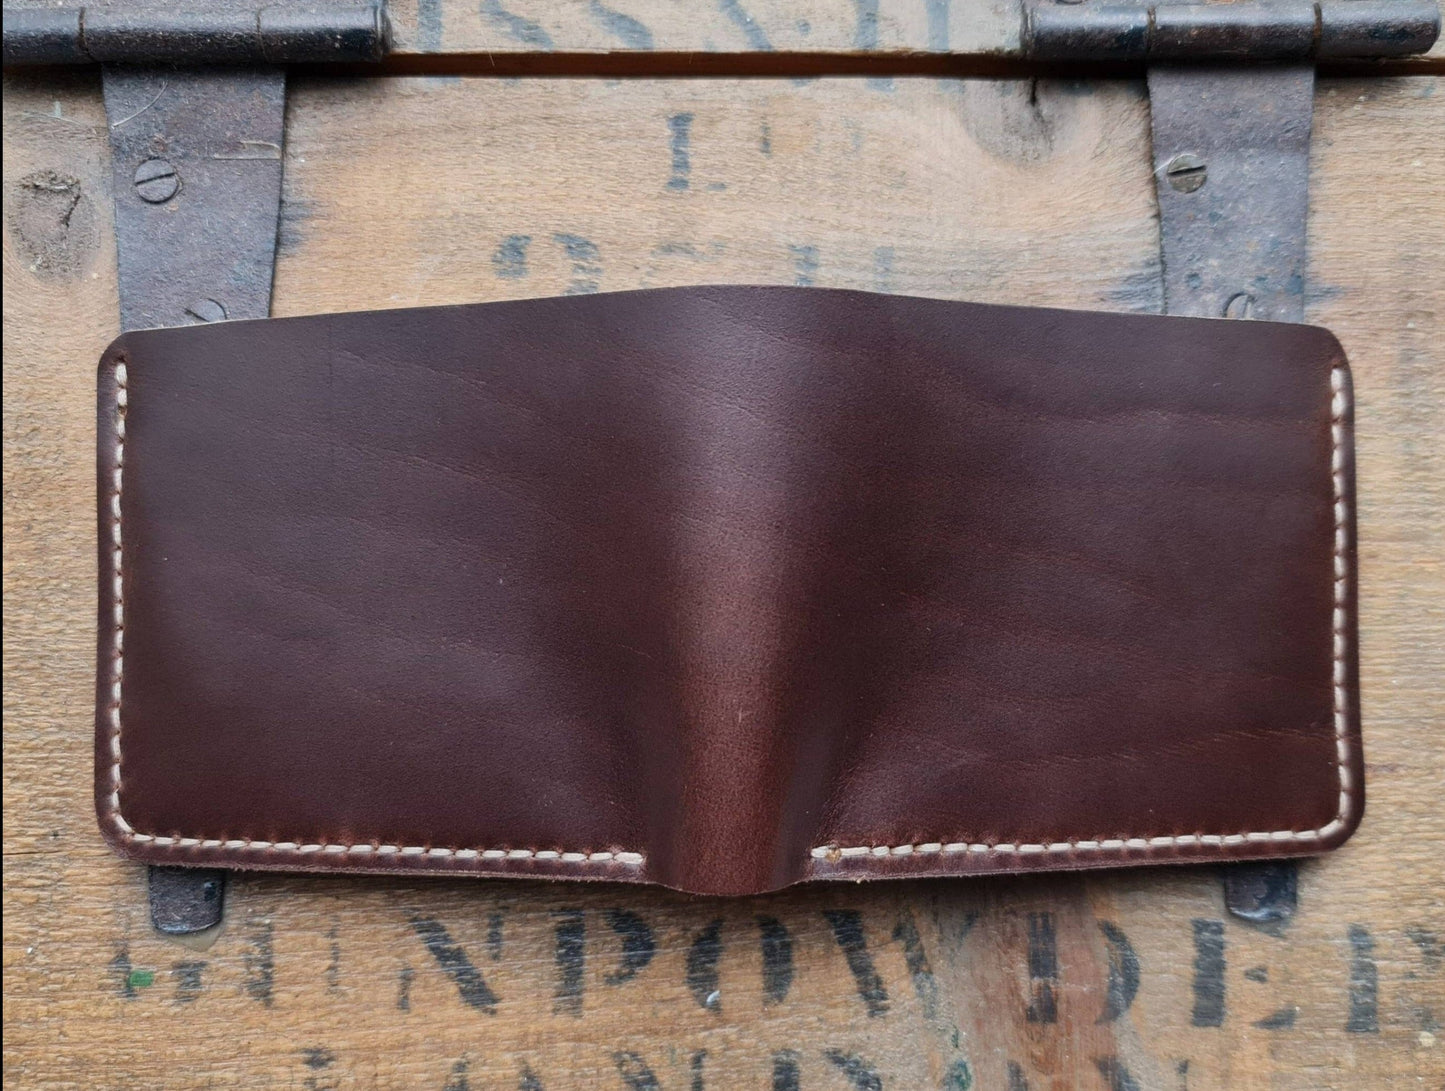 No. 2 Frontiersman Leather Bifold Wallet, Horween Brown Chromexcel Leather, Back Open